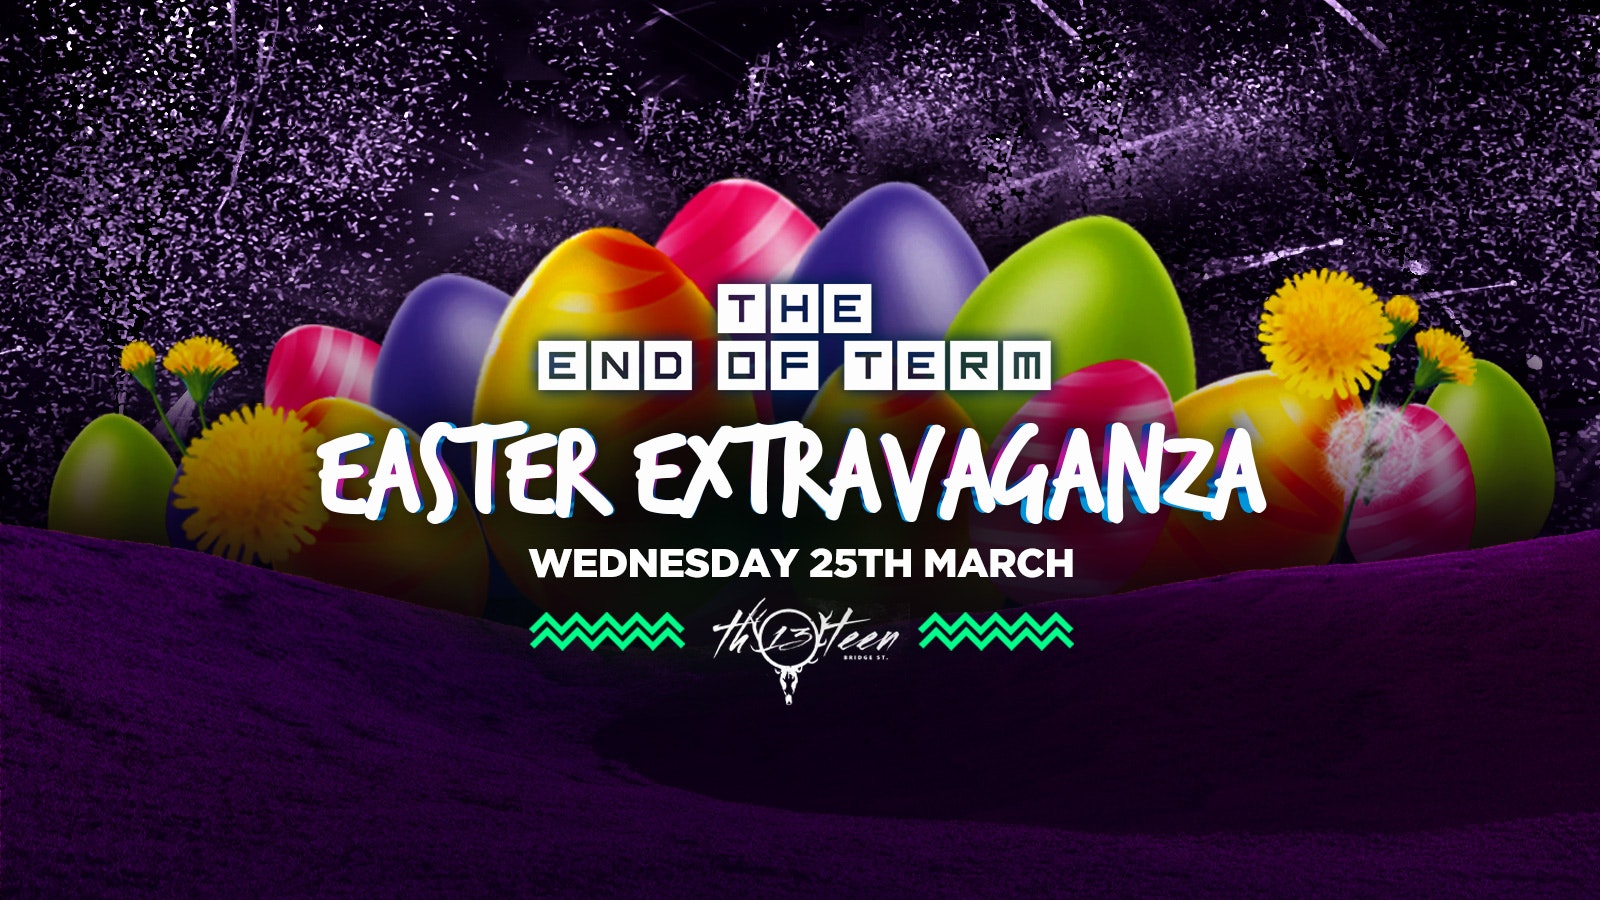 The Easter Extravaganza – End of Term Party – Still Going Ahead as Planned!